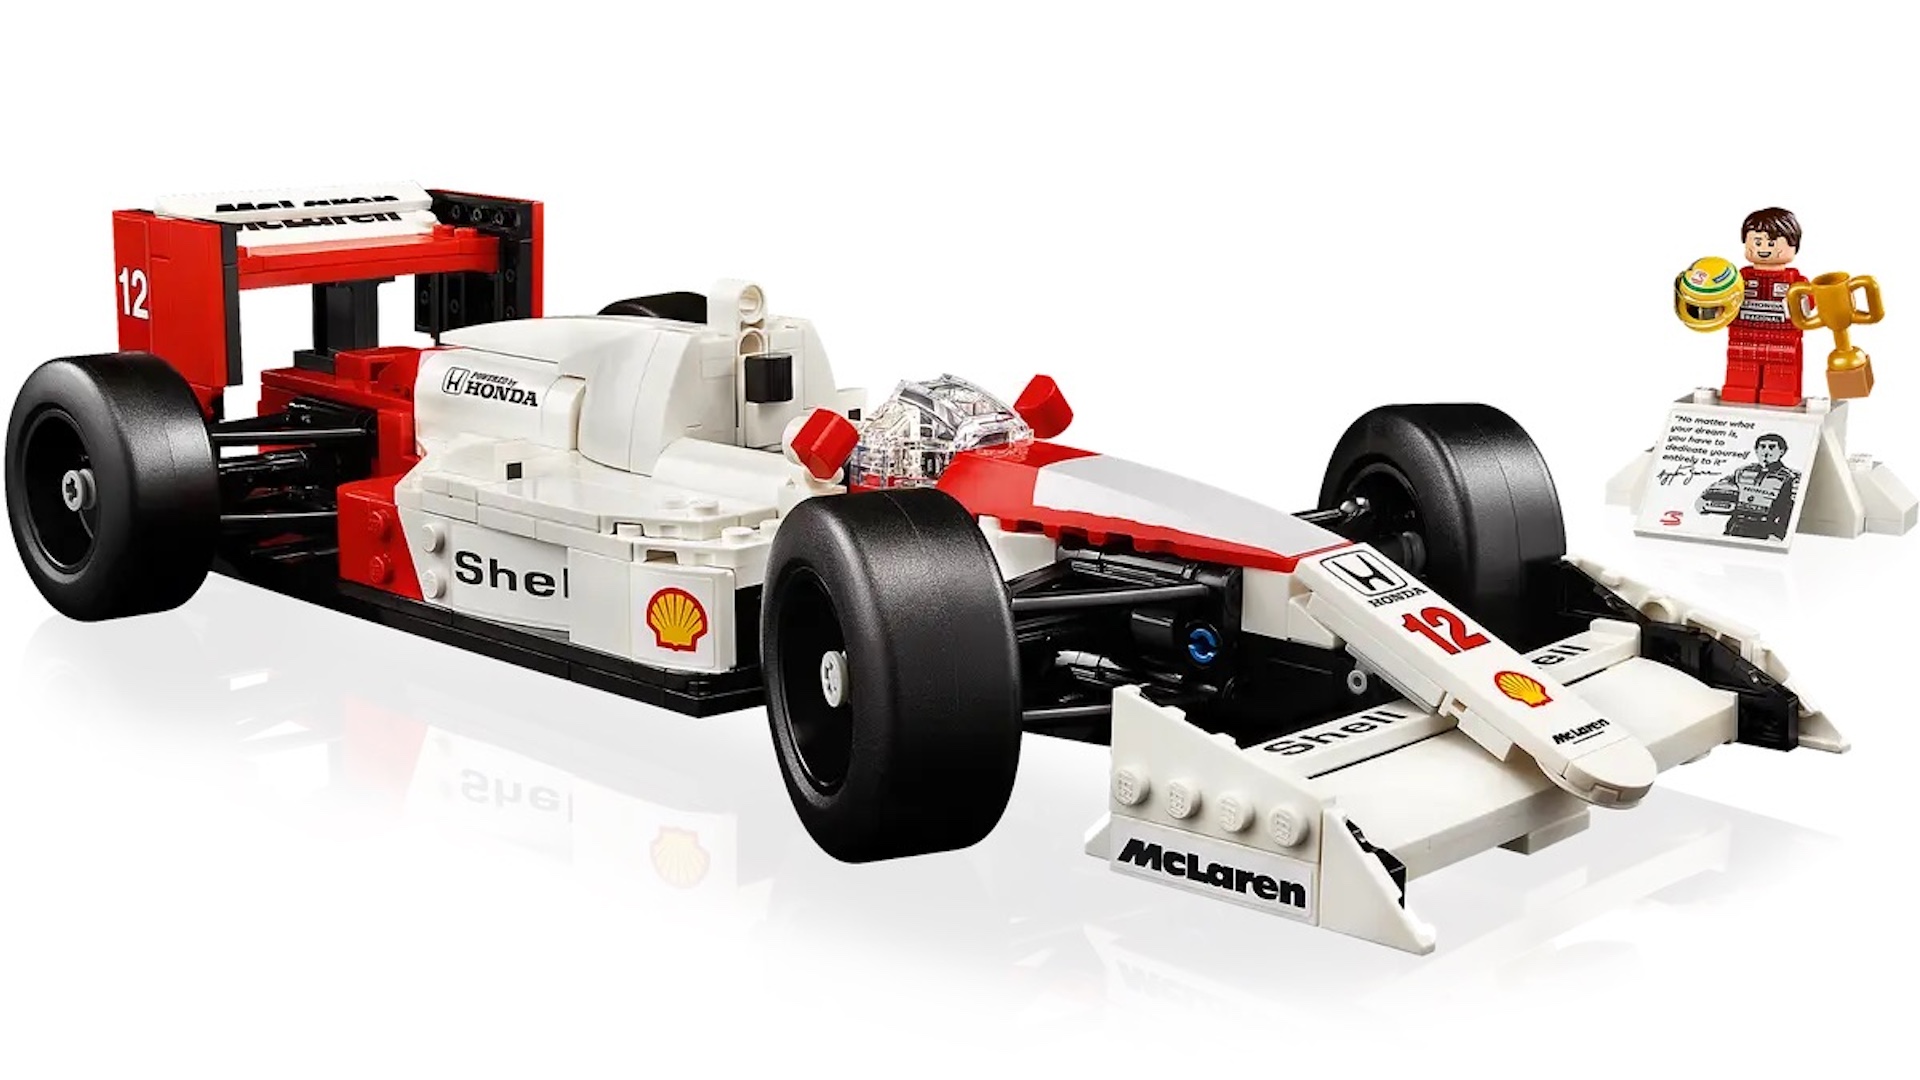 New McLaren MP4/4 Ayrton Senna Lego Set Is the Coolest We’ve Seen in a While